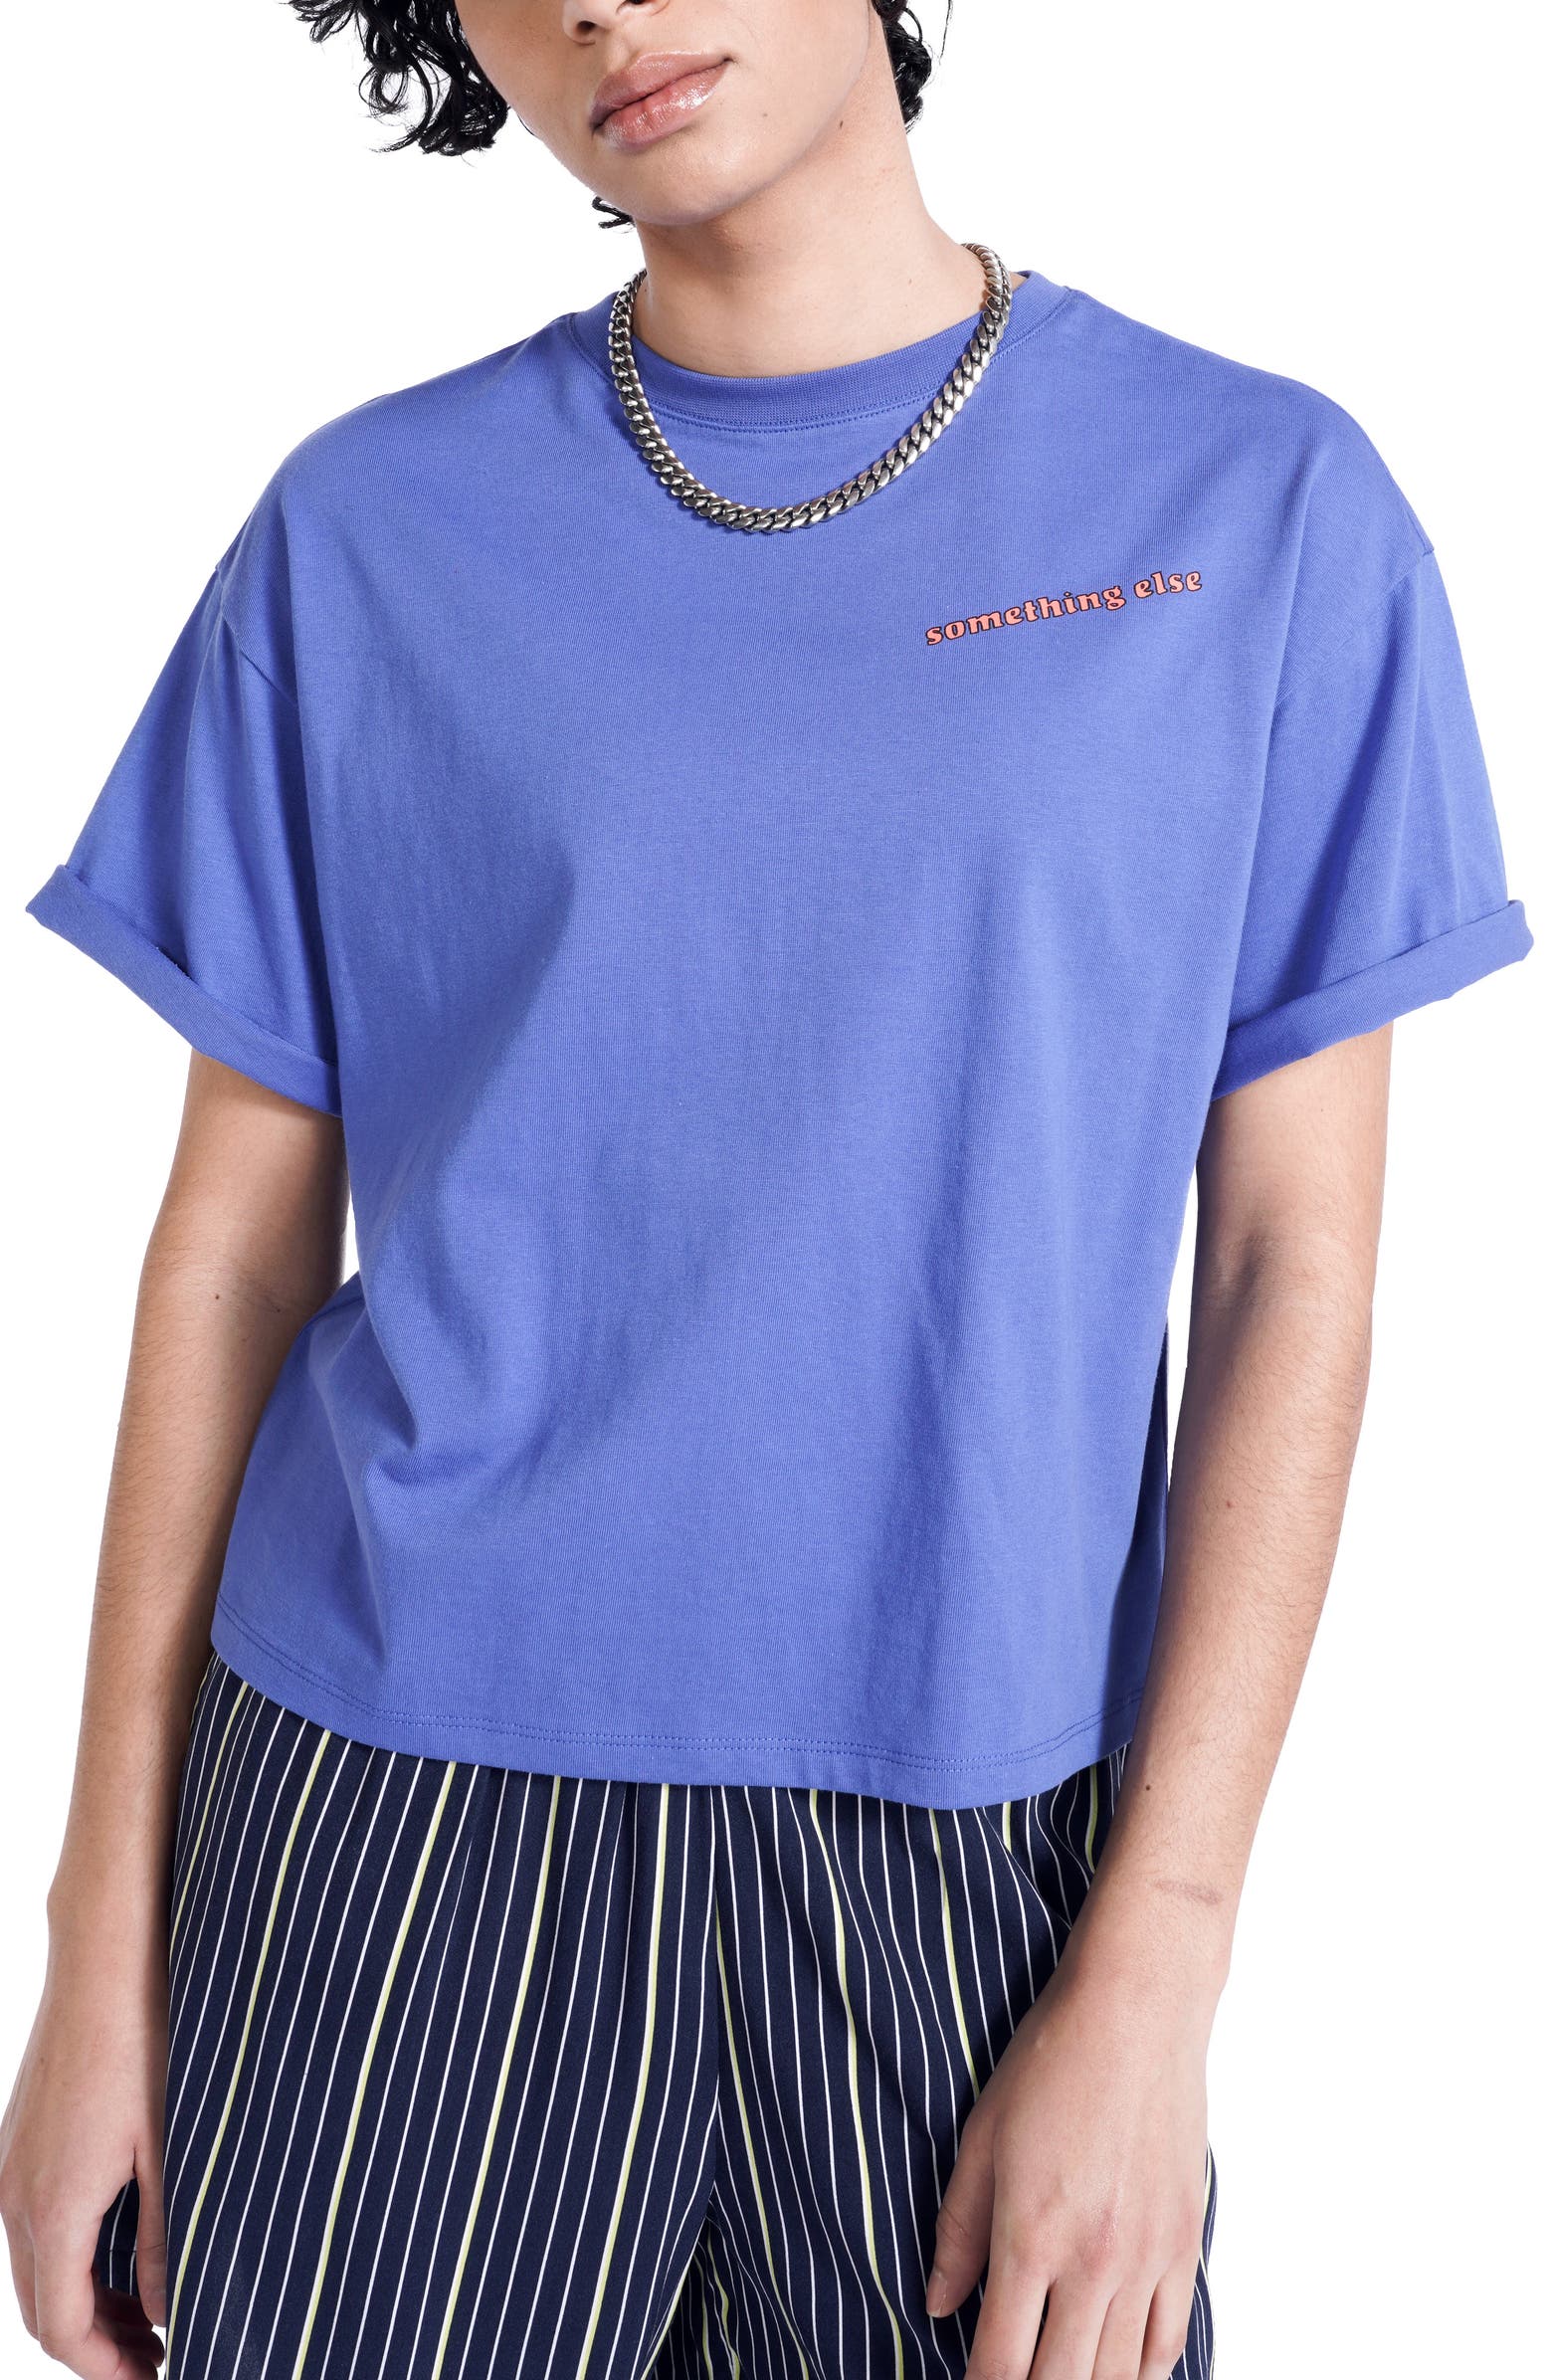 Boxy Graphic Tee on Sale At Nordstrom Rack